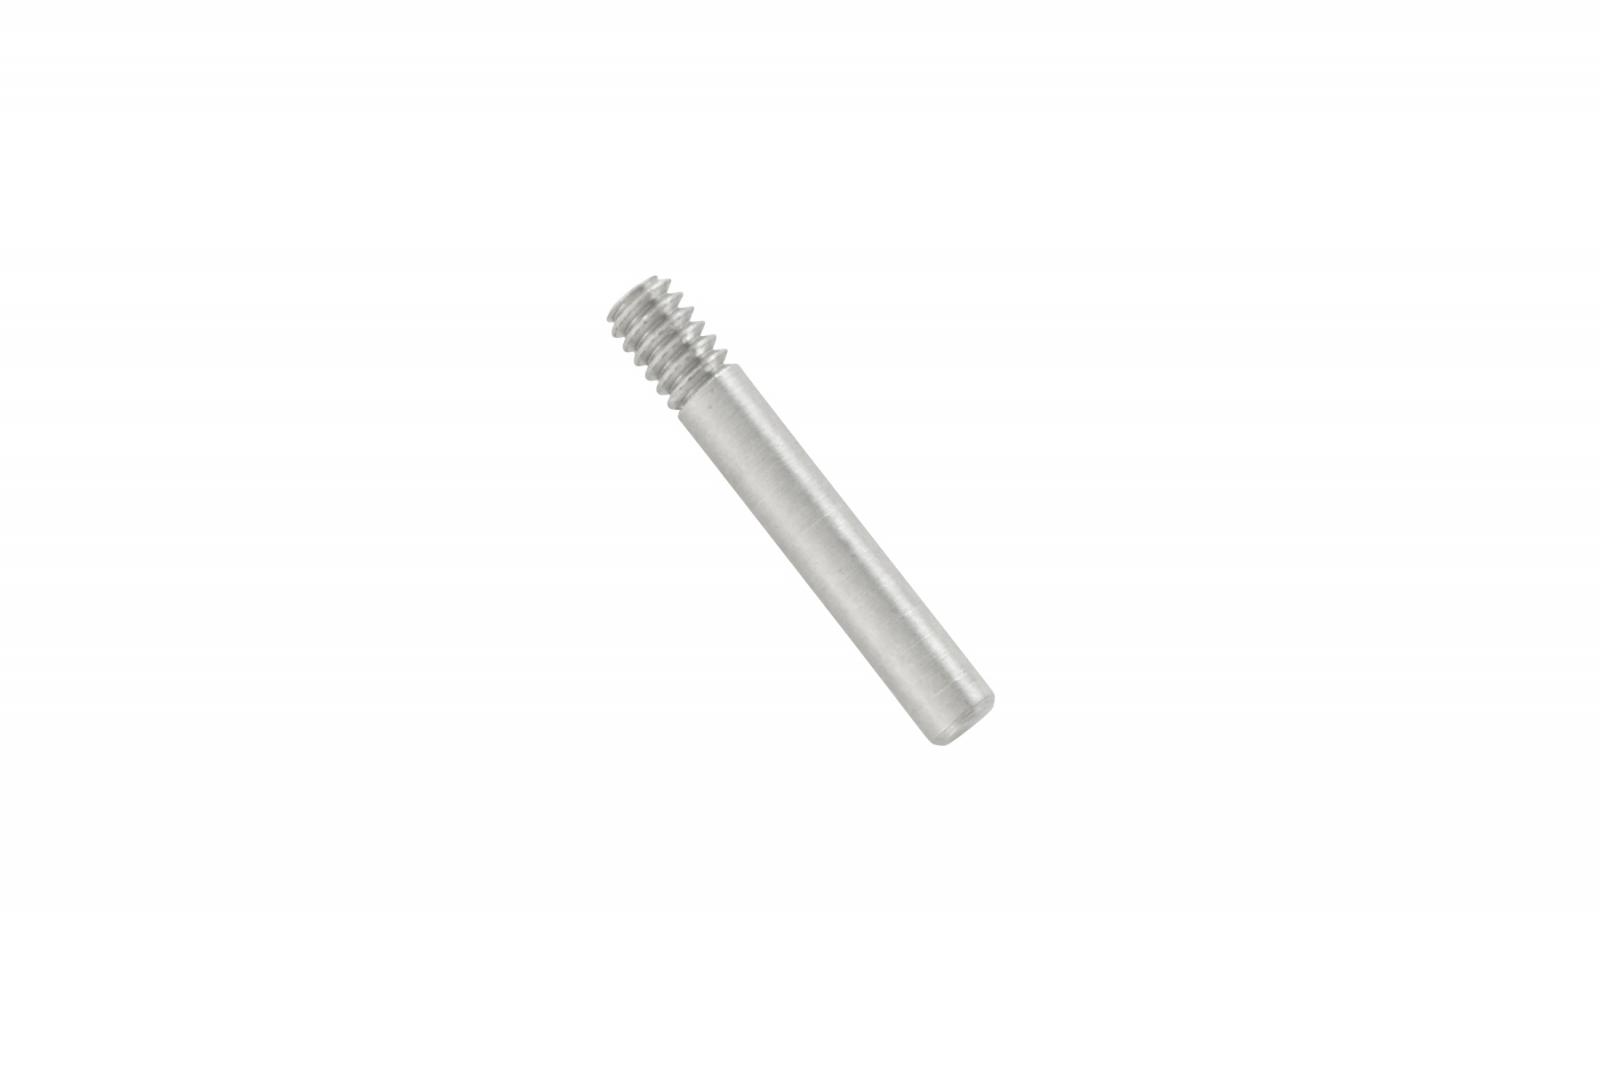 TapeTech® Needle Holder Lock. Part number 050027